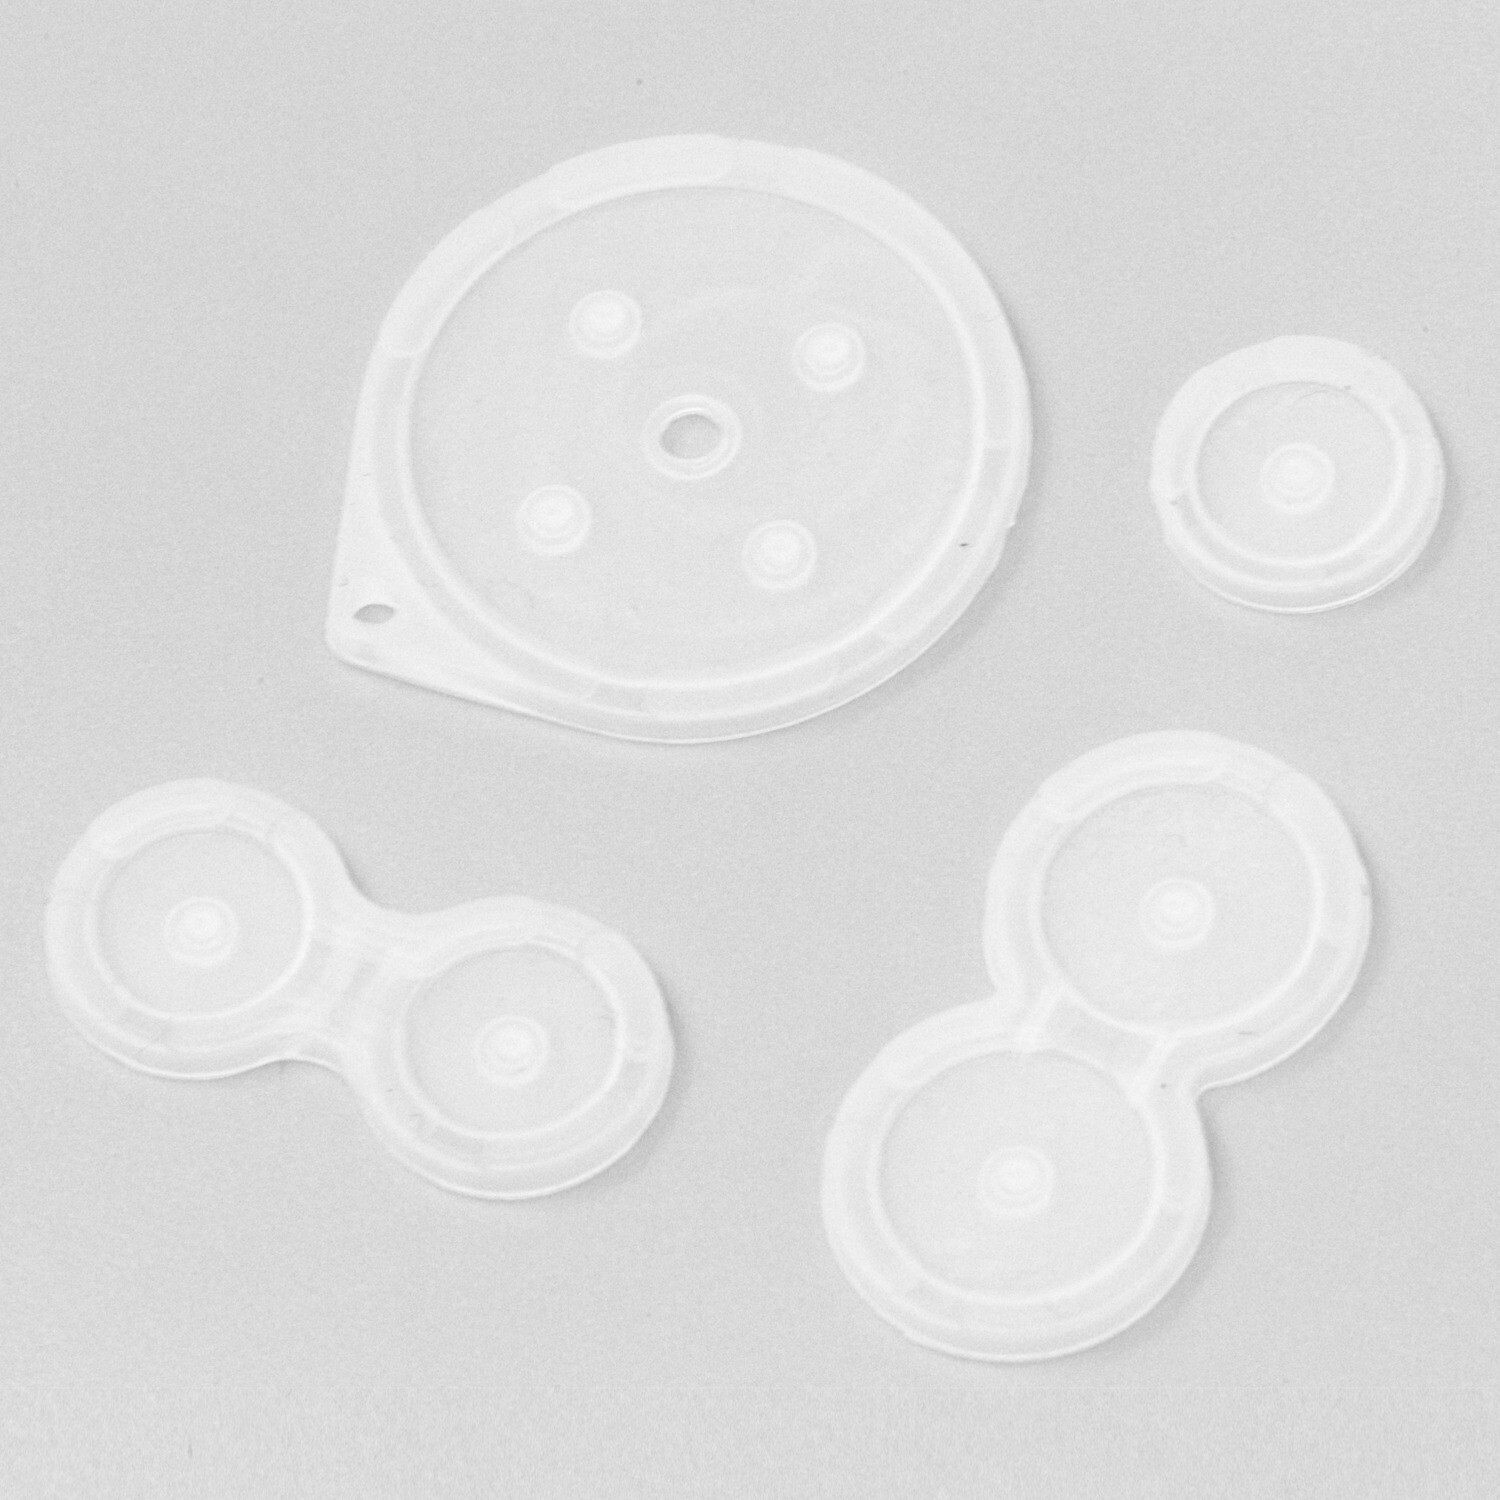 Game Boy Advance SP Rubber Pads (Clear)